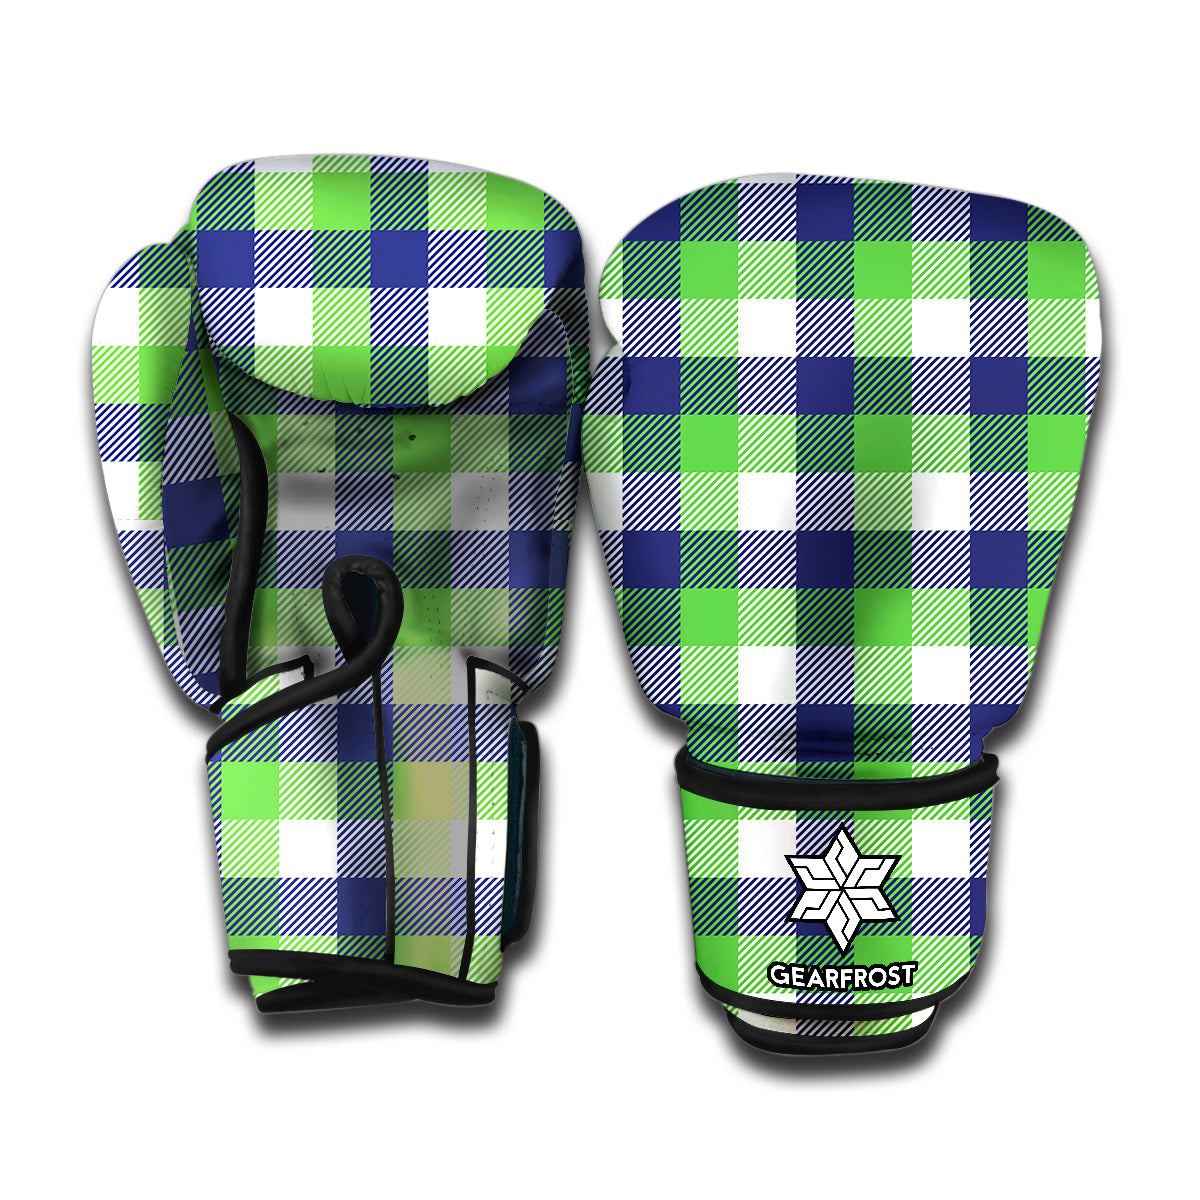 White Green And Blue Buffalo Plaid Print Boxing Gloves